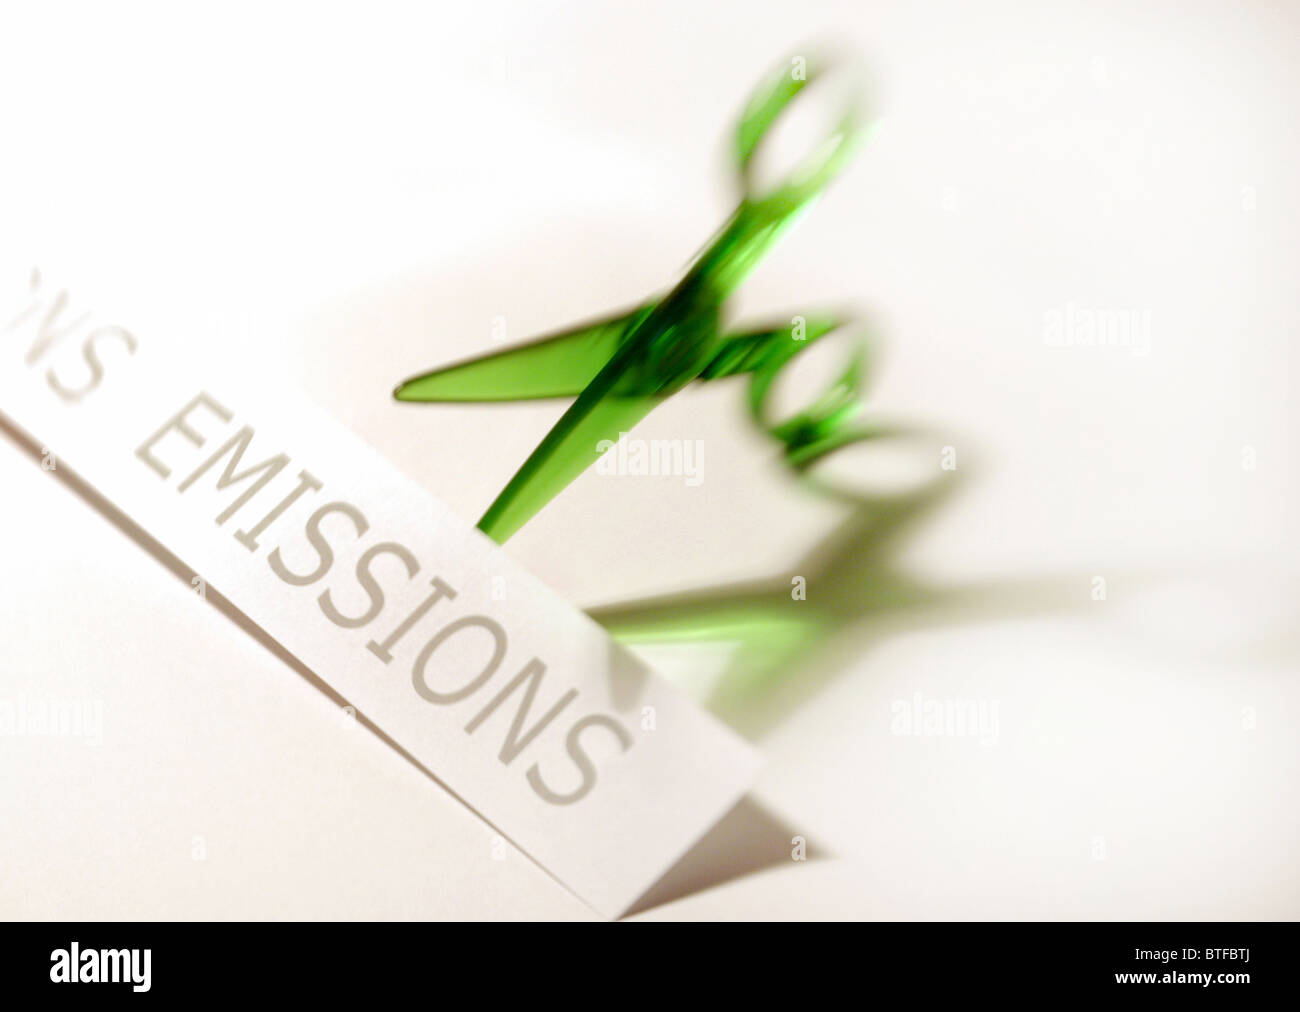 Emission reduction concept depicting green scissors cutting emissions graphic. Stock Photo